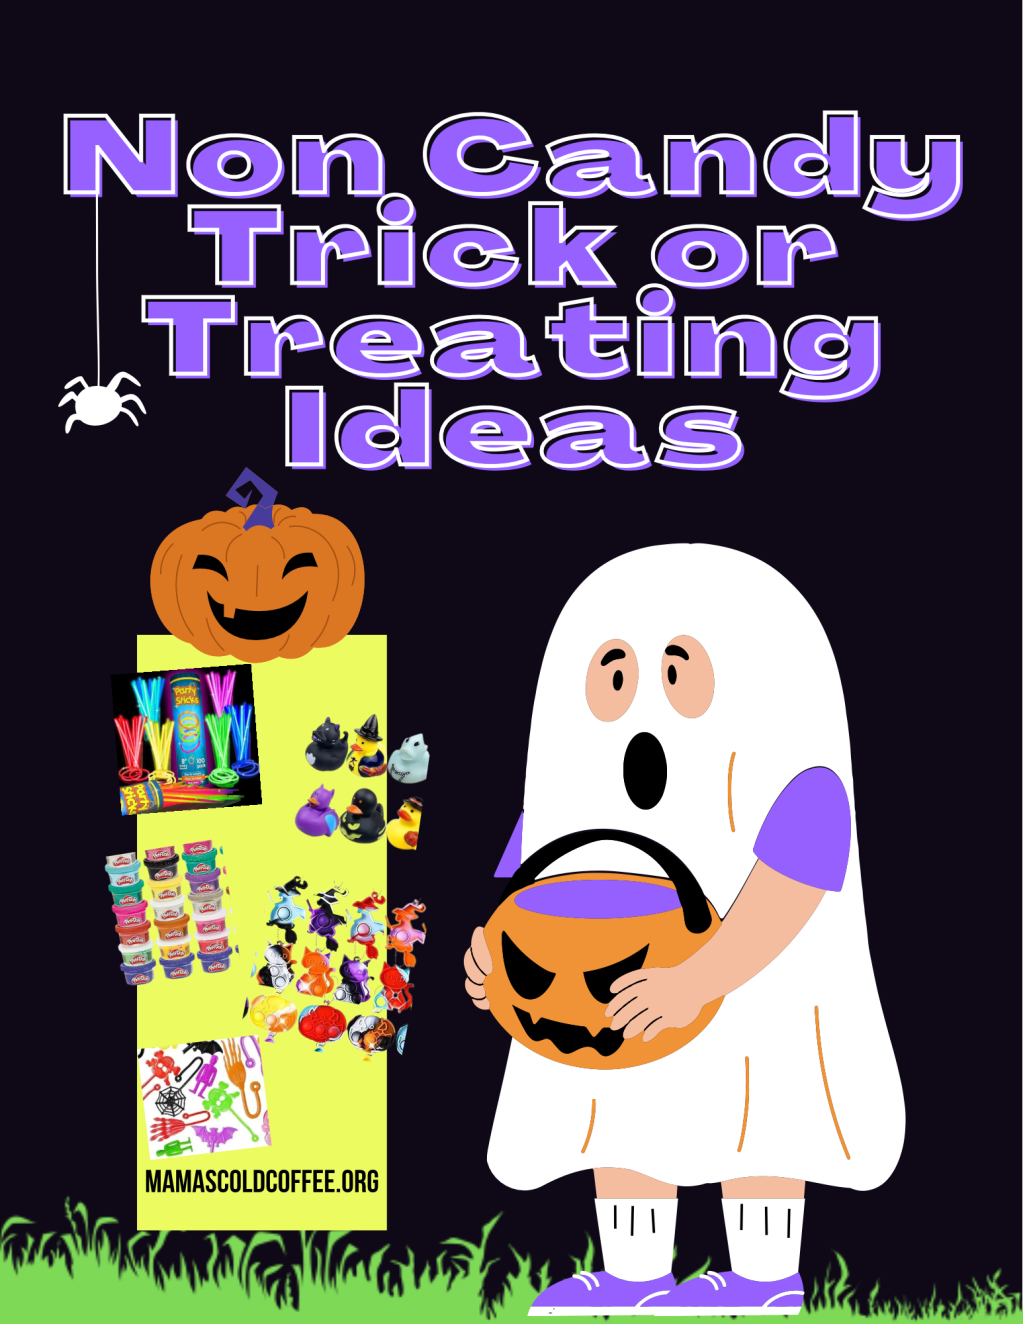 Non Candy Trick or Treating Ideas